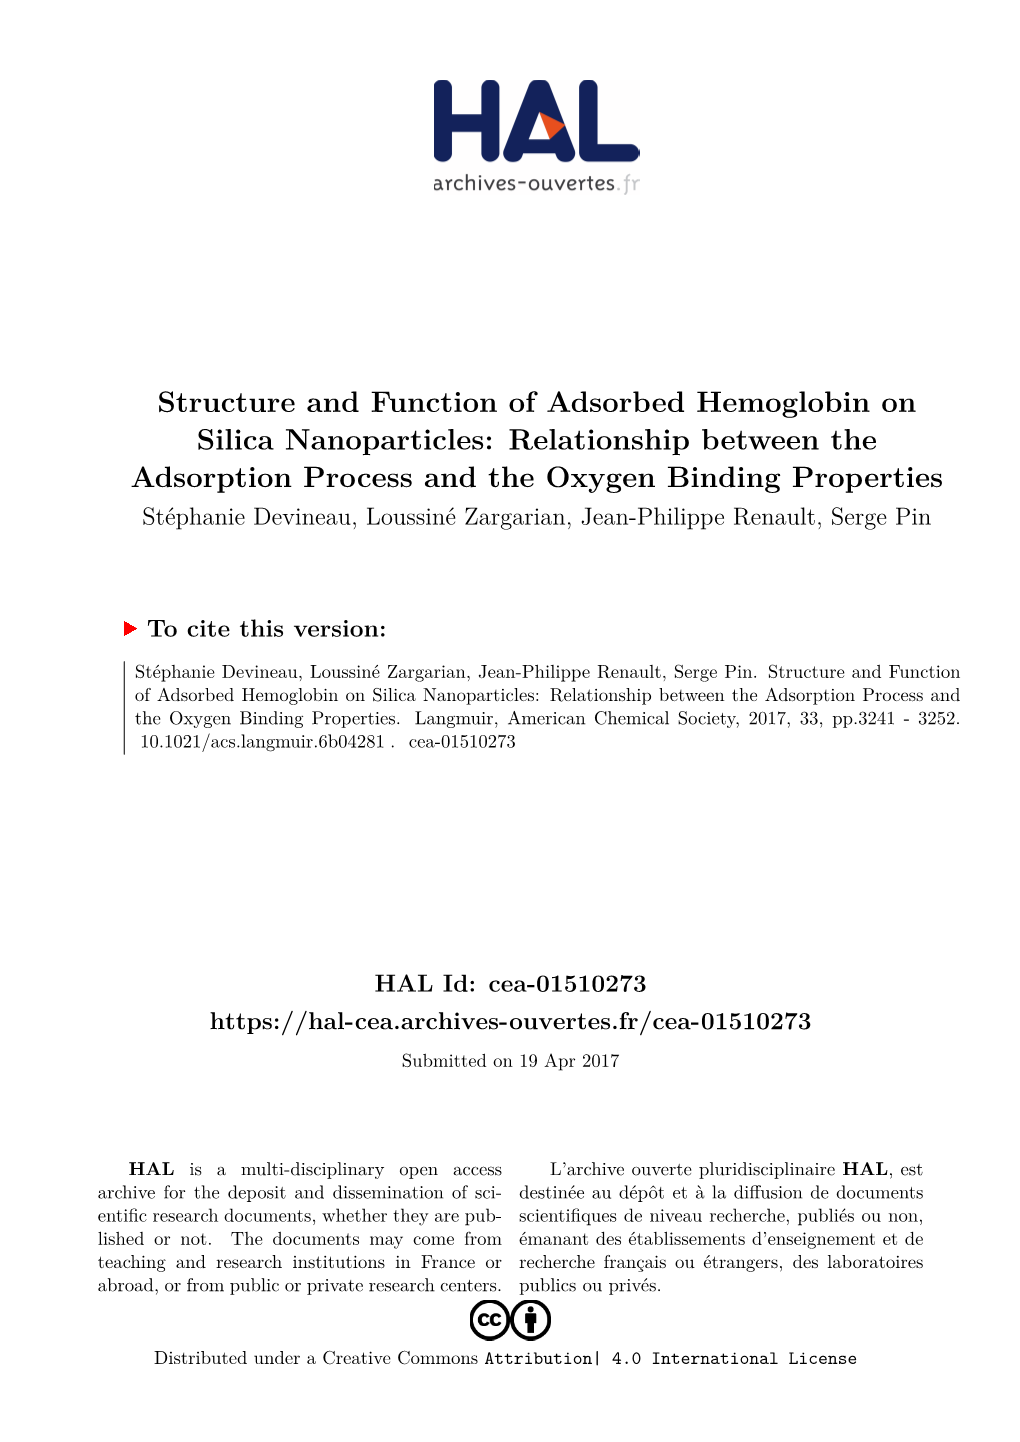 Structure and Function of Adsorbed Hemoglobin on Silica Nanoparticles